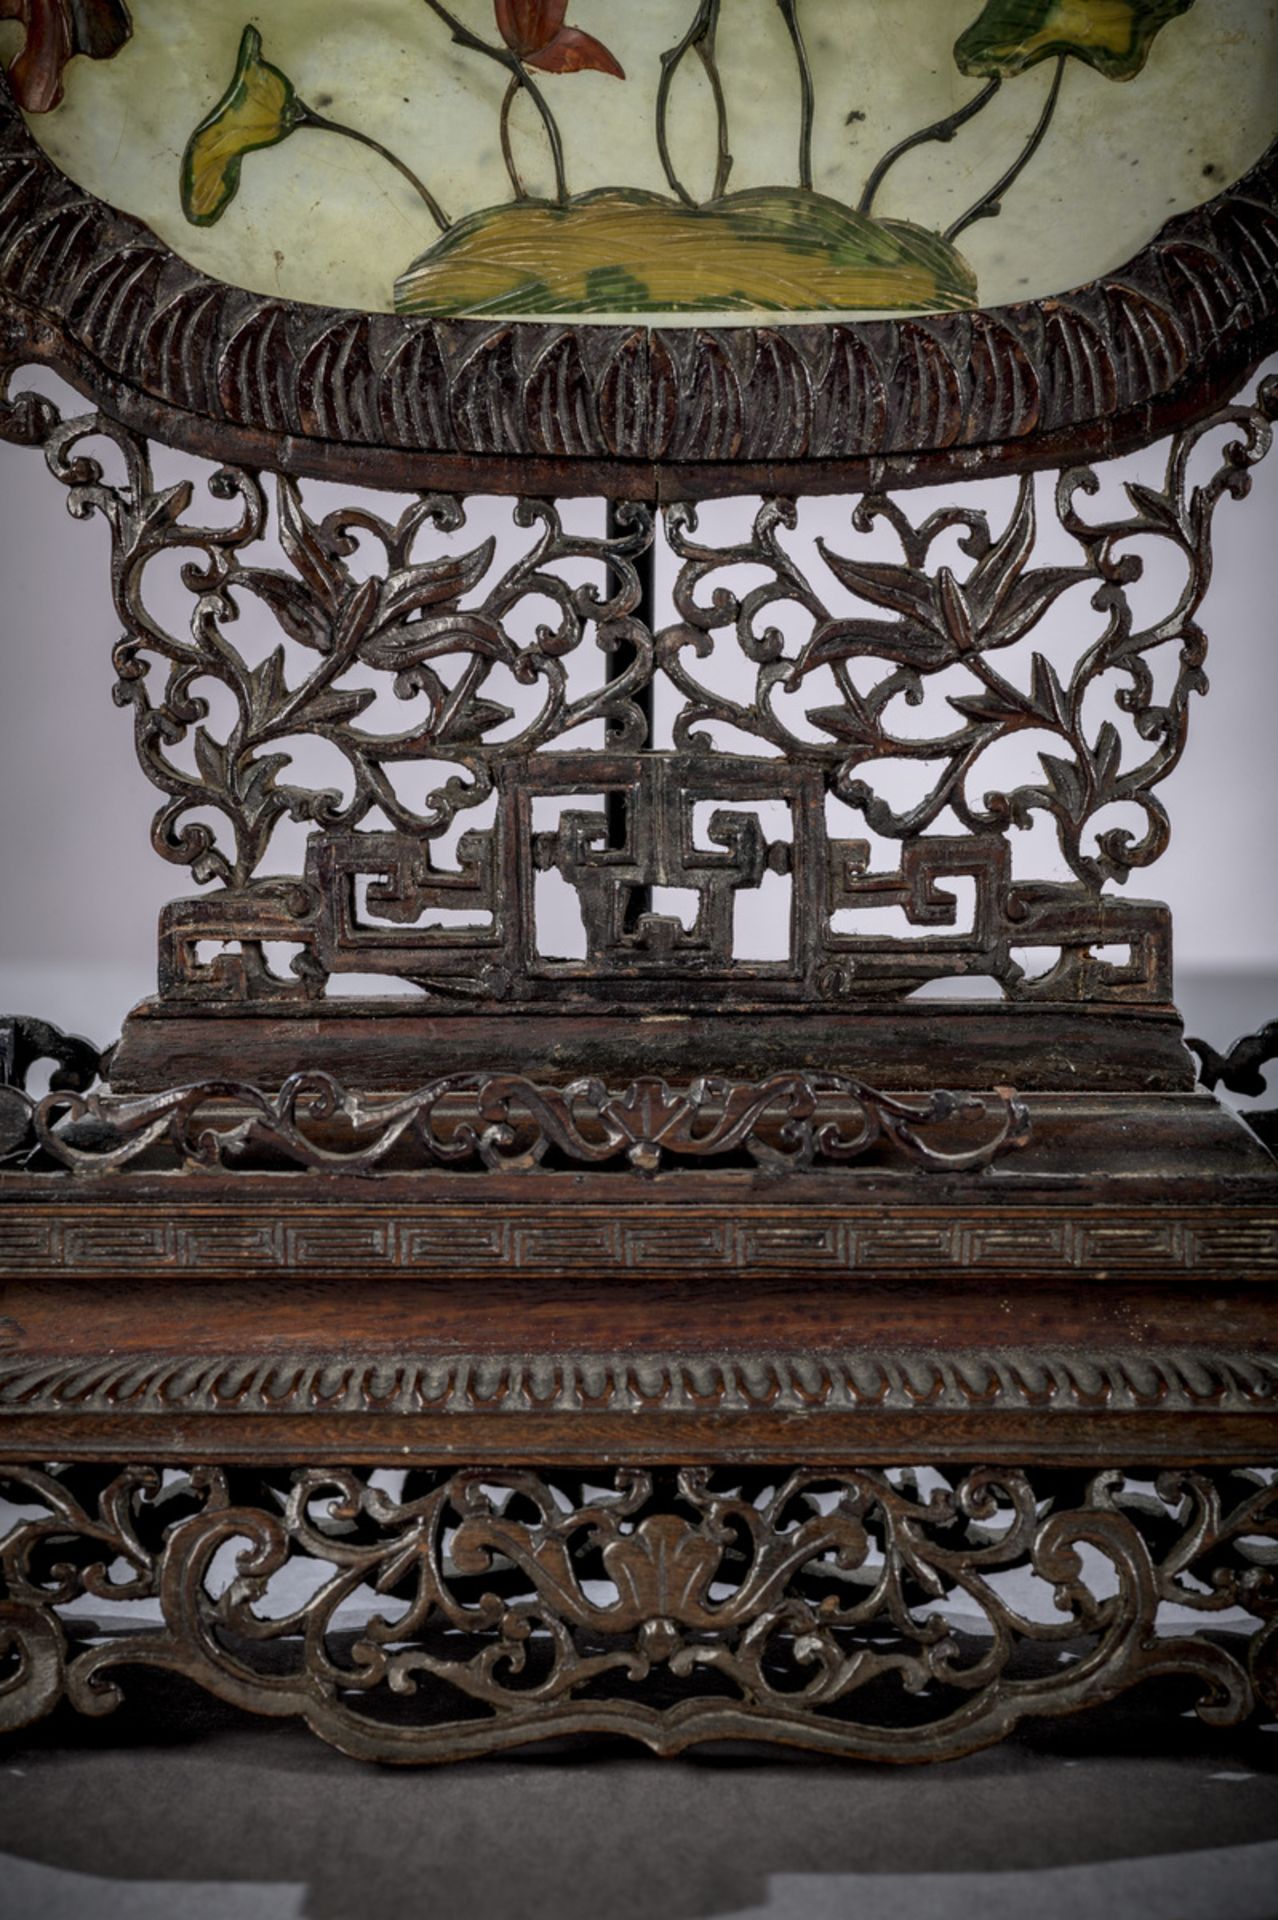 A pair of Chinese table screens with inlaywork on wooden pedestals (44x20x10 cm) (*) - Image 3 of 9